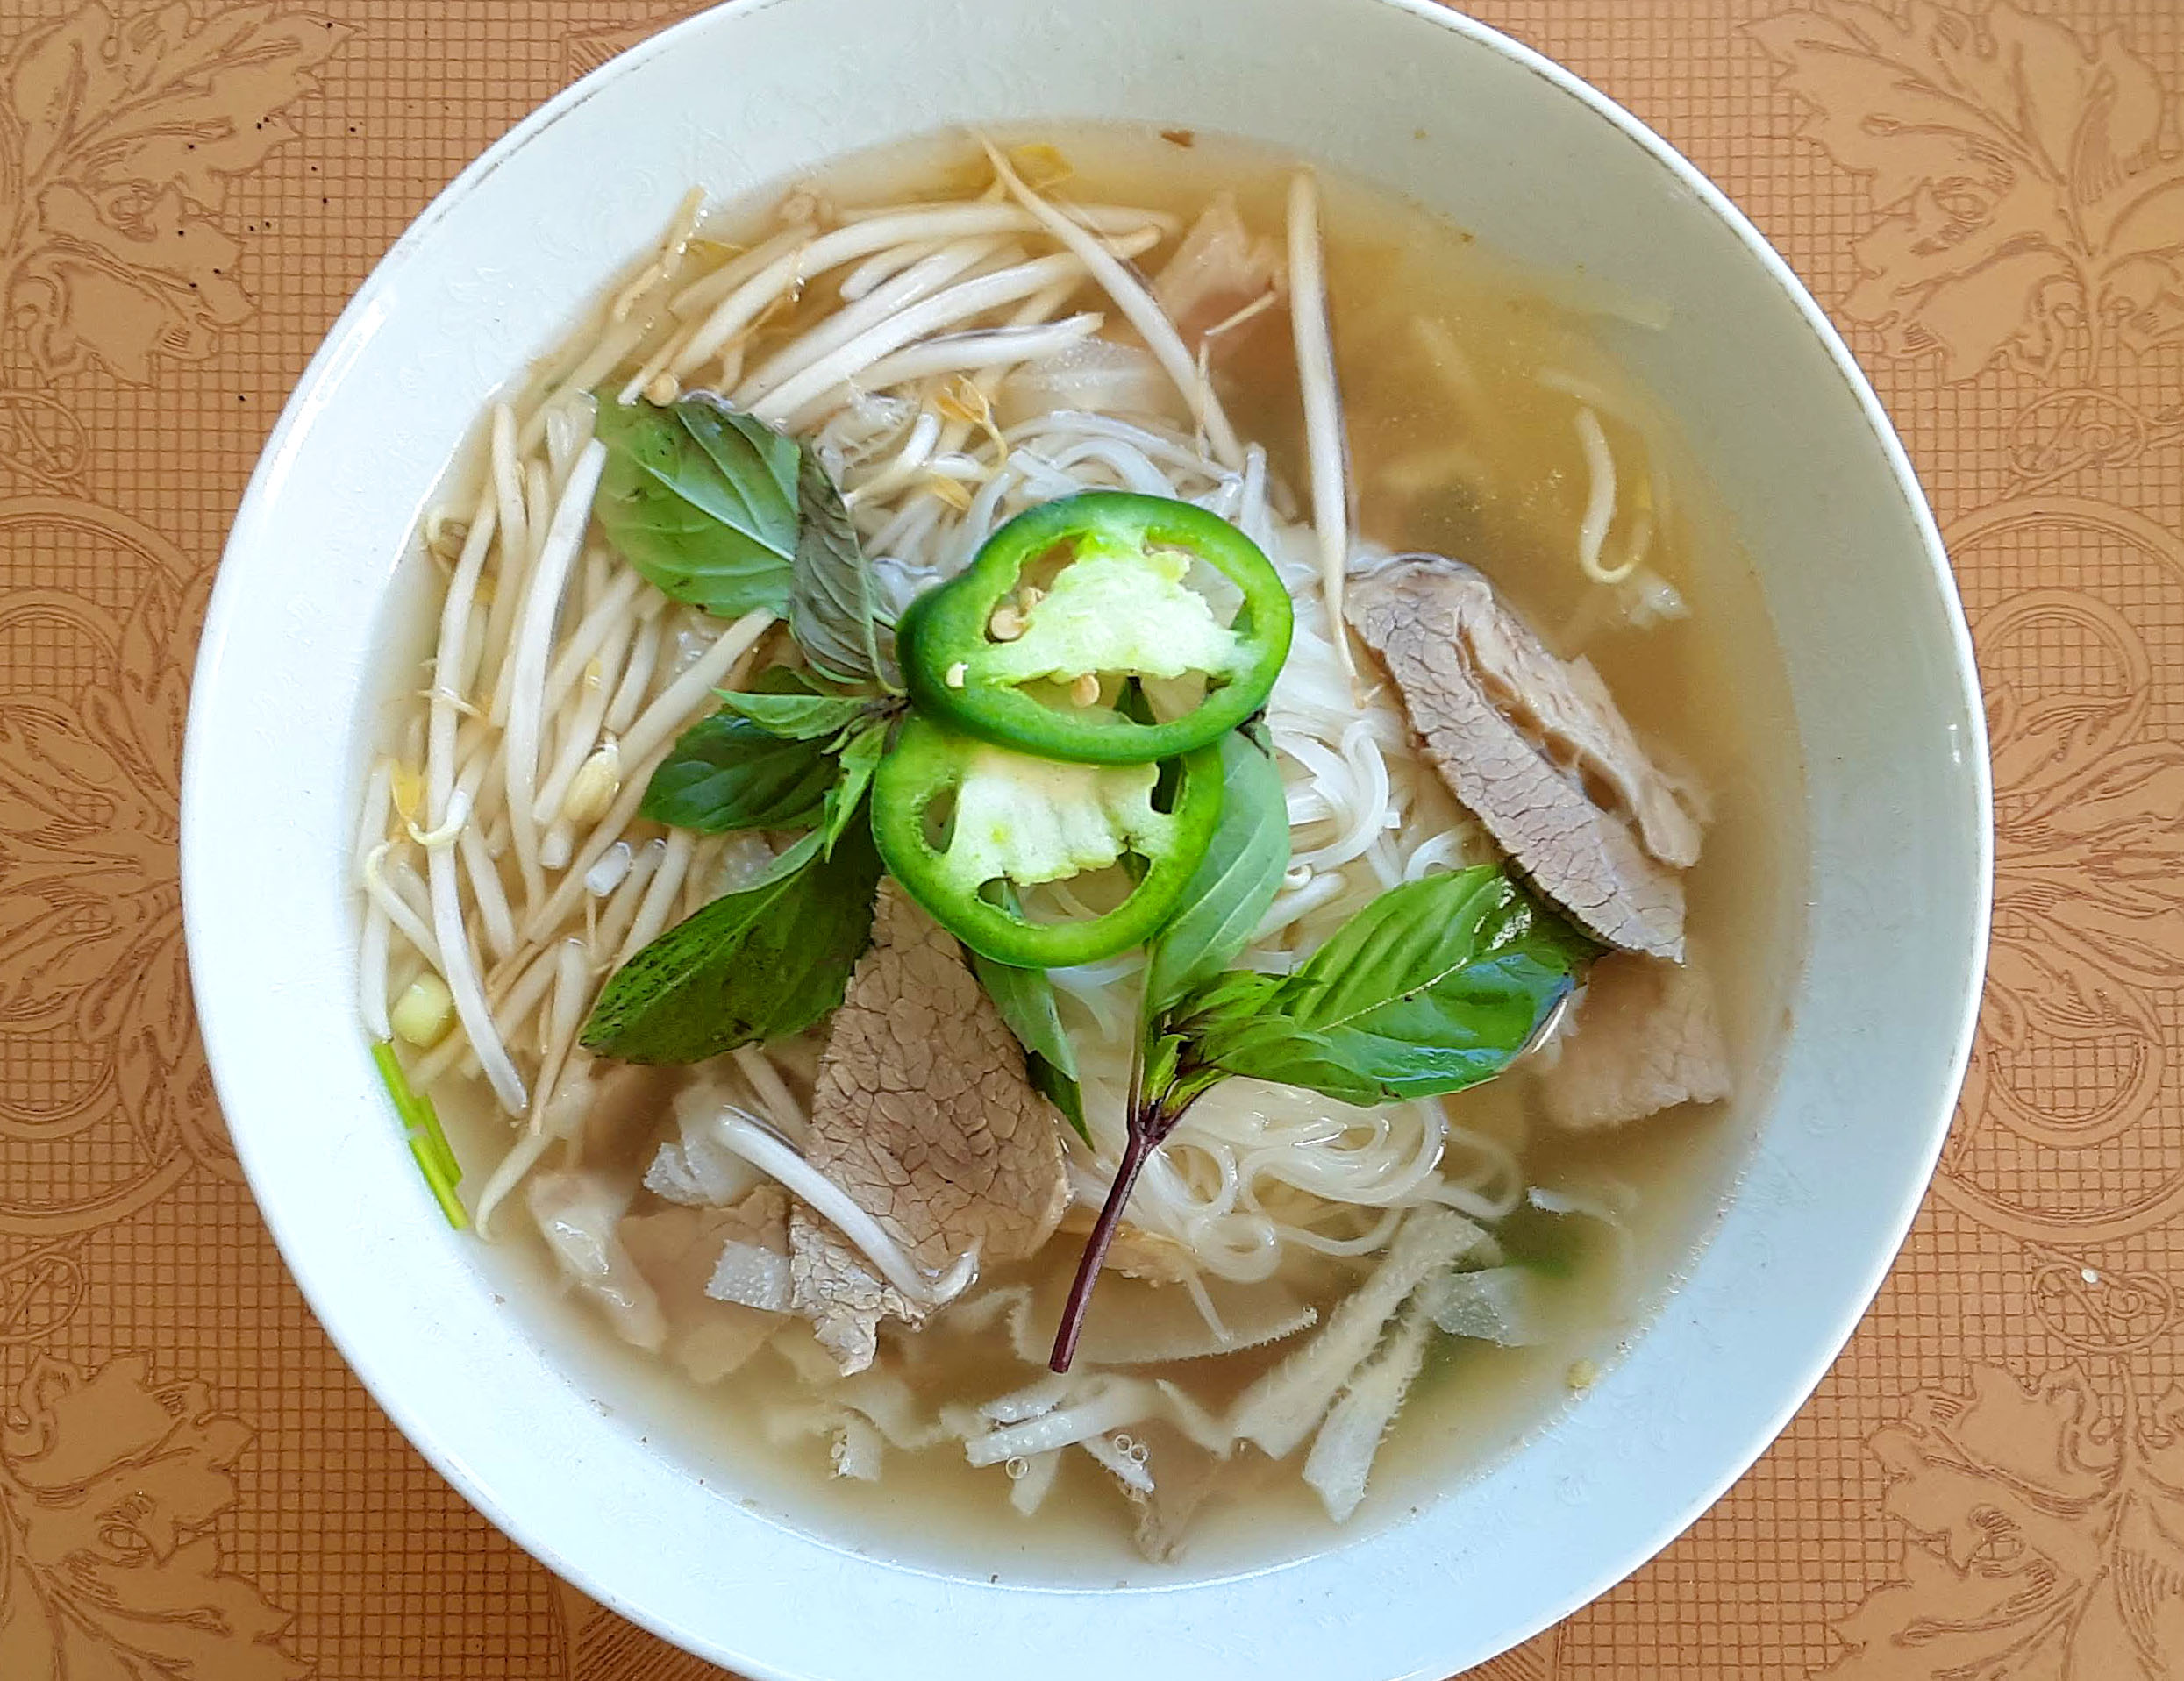 In a white bowl, there is pho with sliced jalapenos, white bean sprouts, and beef slices. Photo by Paul Young.